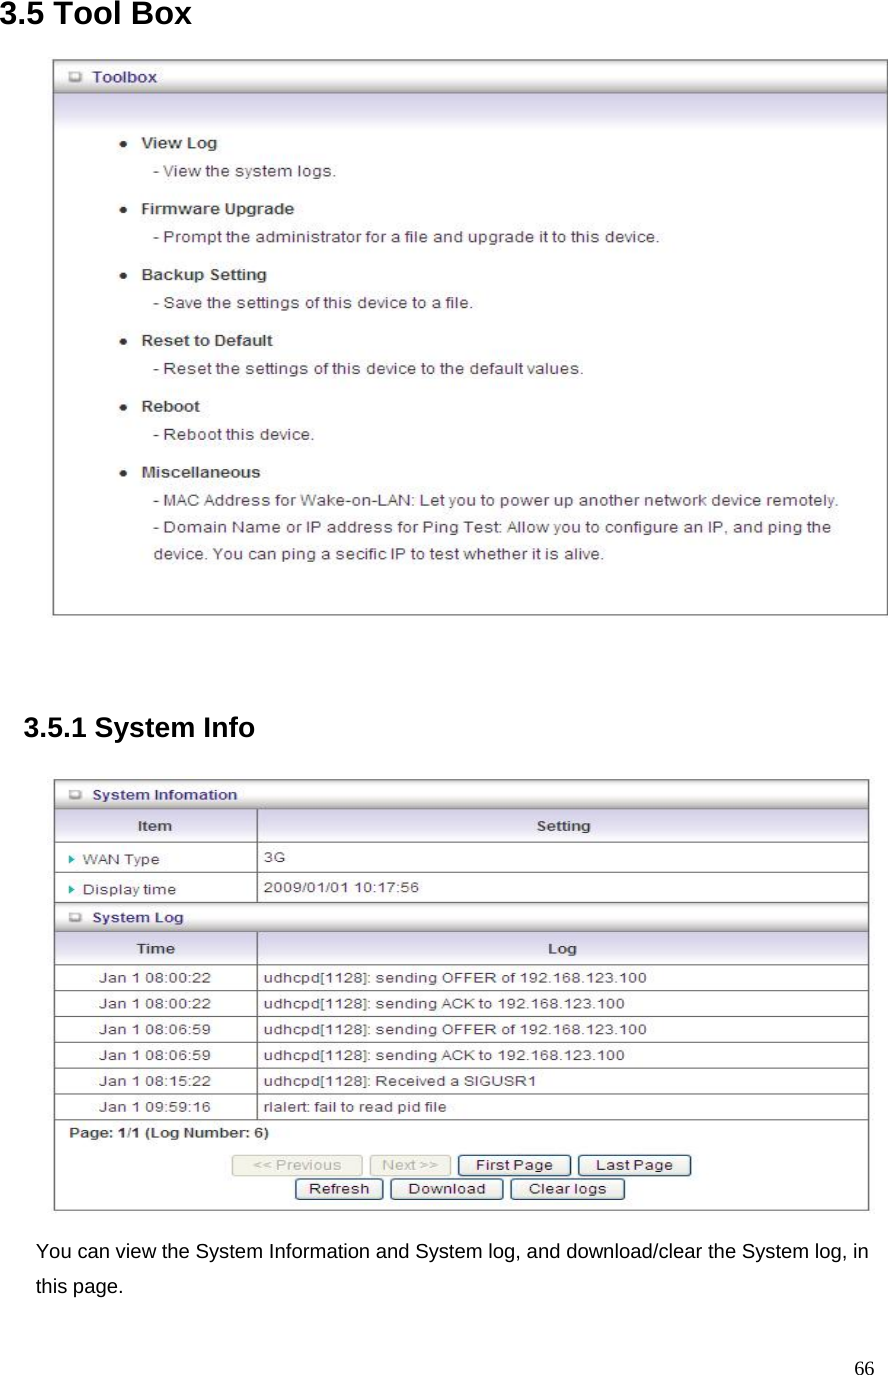  663.5 Tool Box       3.5.1 System Info    You can view the System Information and System log, and download/clear the System log, in this page.  